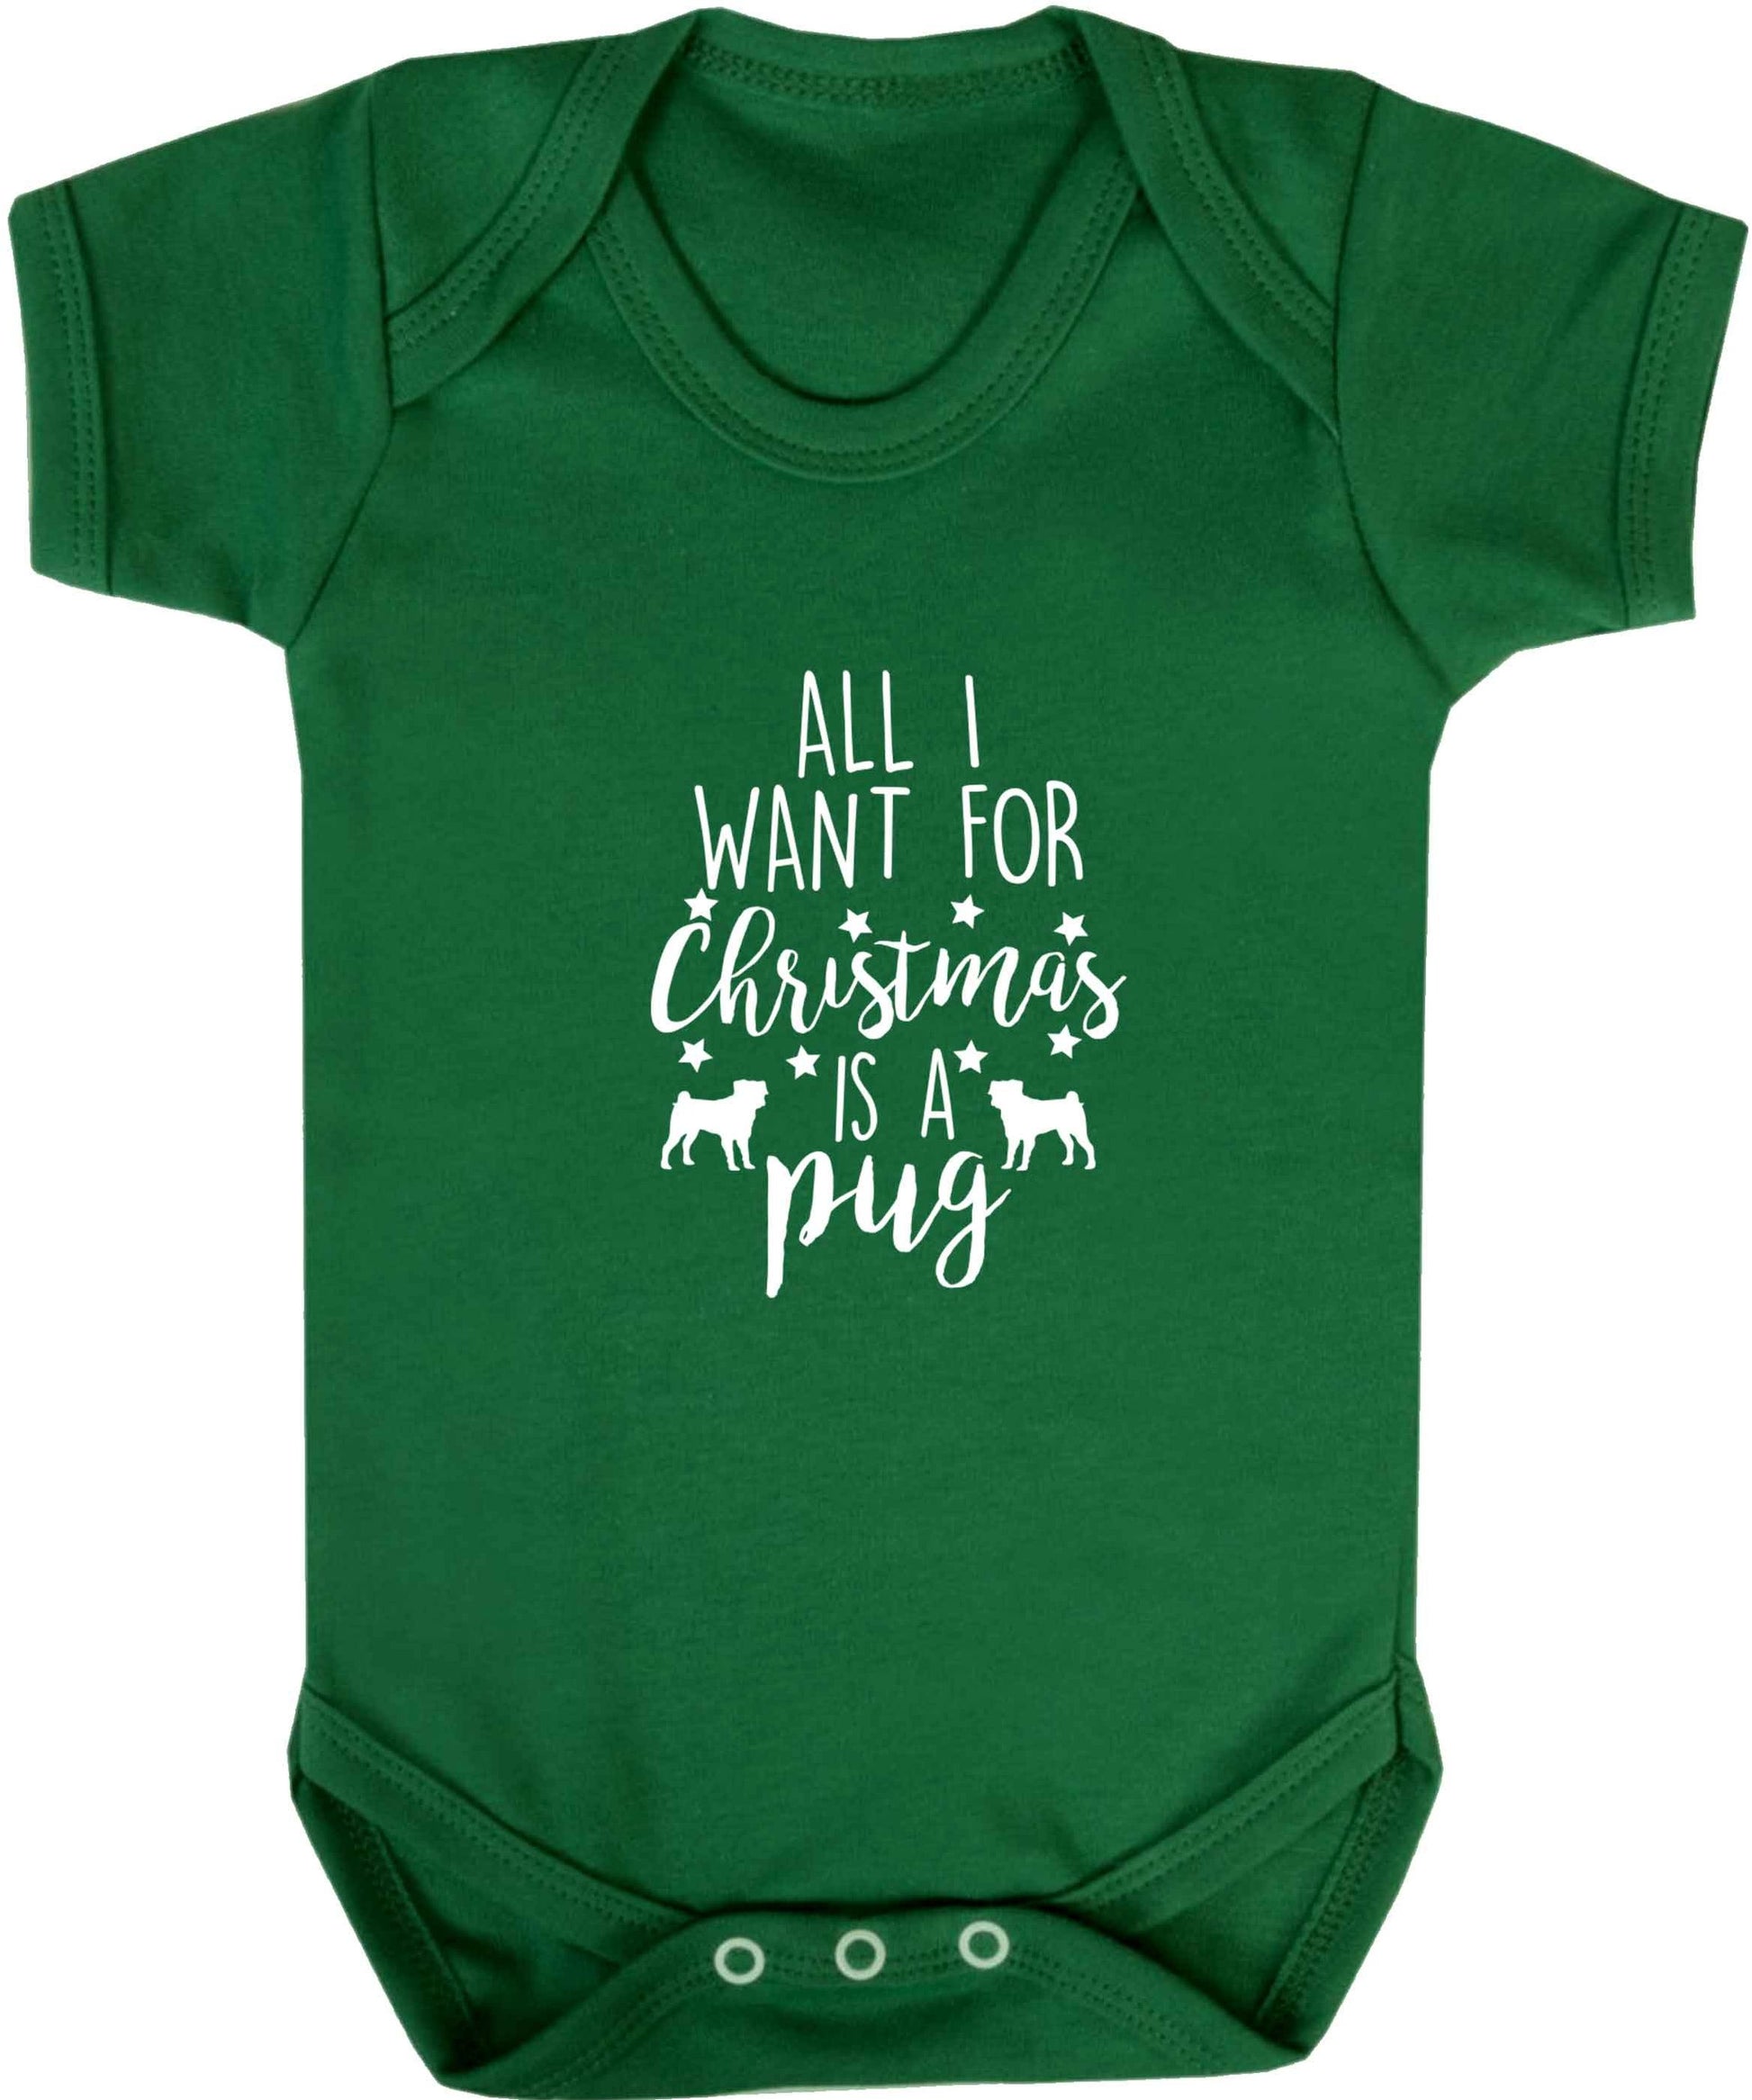 All I want for Christmas is a pug baby vest green 18-24 months